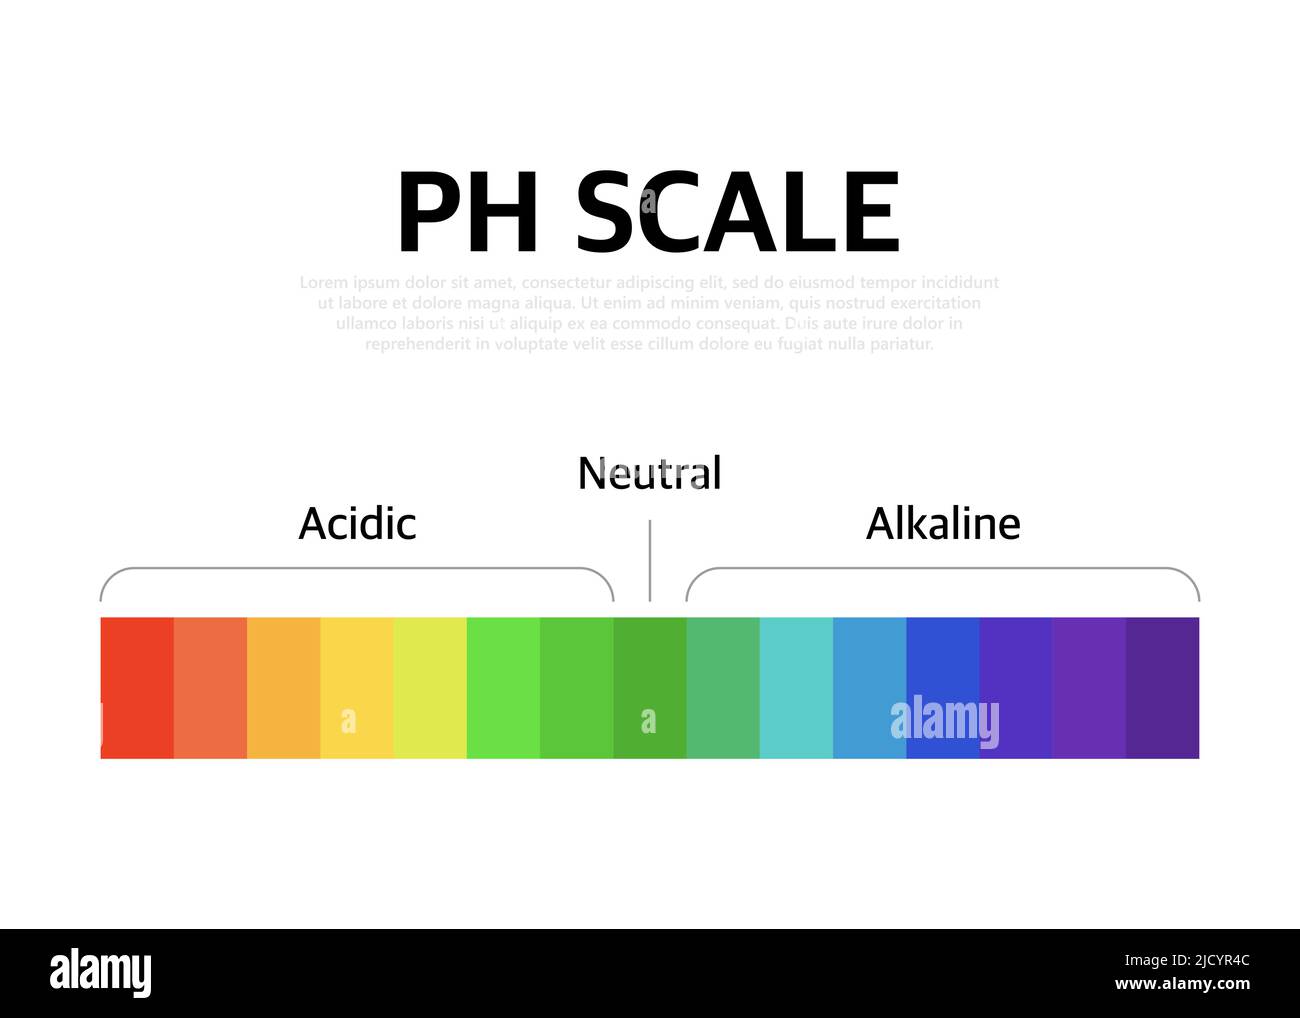 https://c8.alamy.com/comp/2JCYR4C/the-ph-scale-universal-indicator-ph-color-chart-diagram-vector-illustration-with-ph-scale-2JCYR4C.jpg